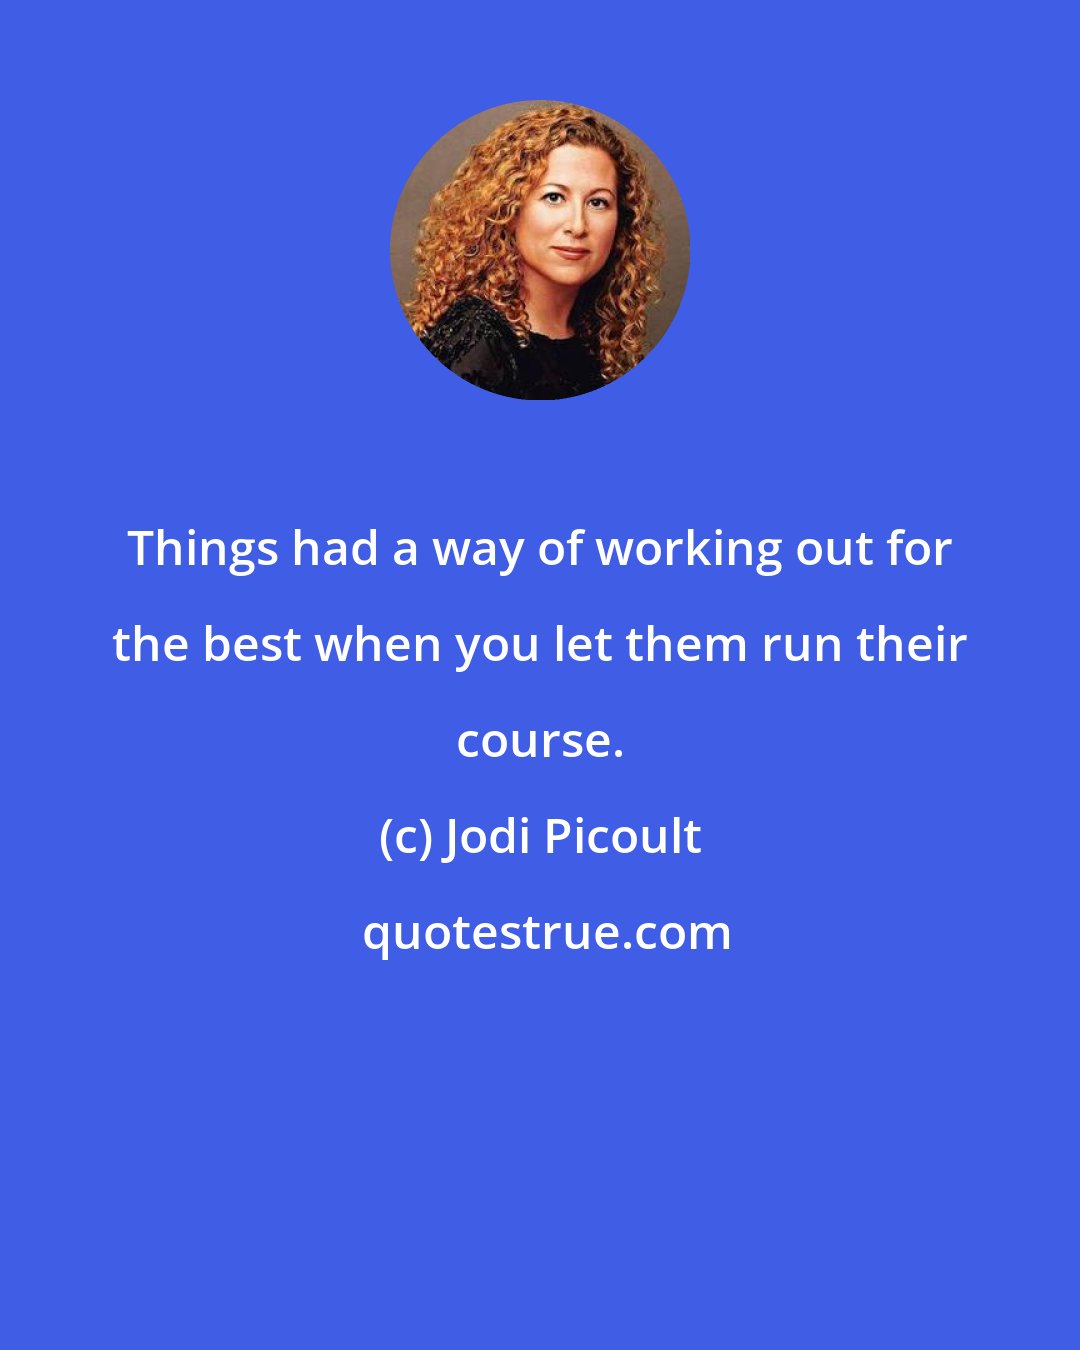 Jodi Picoult: Things had a way of working out for the best when you let them run their course.